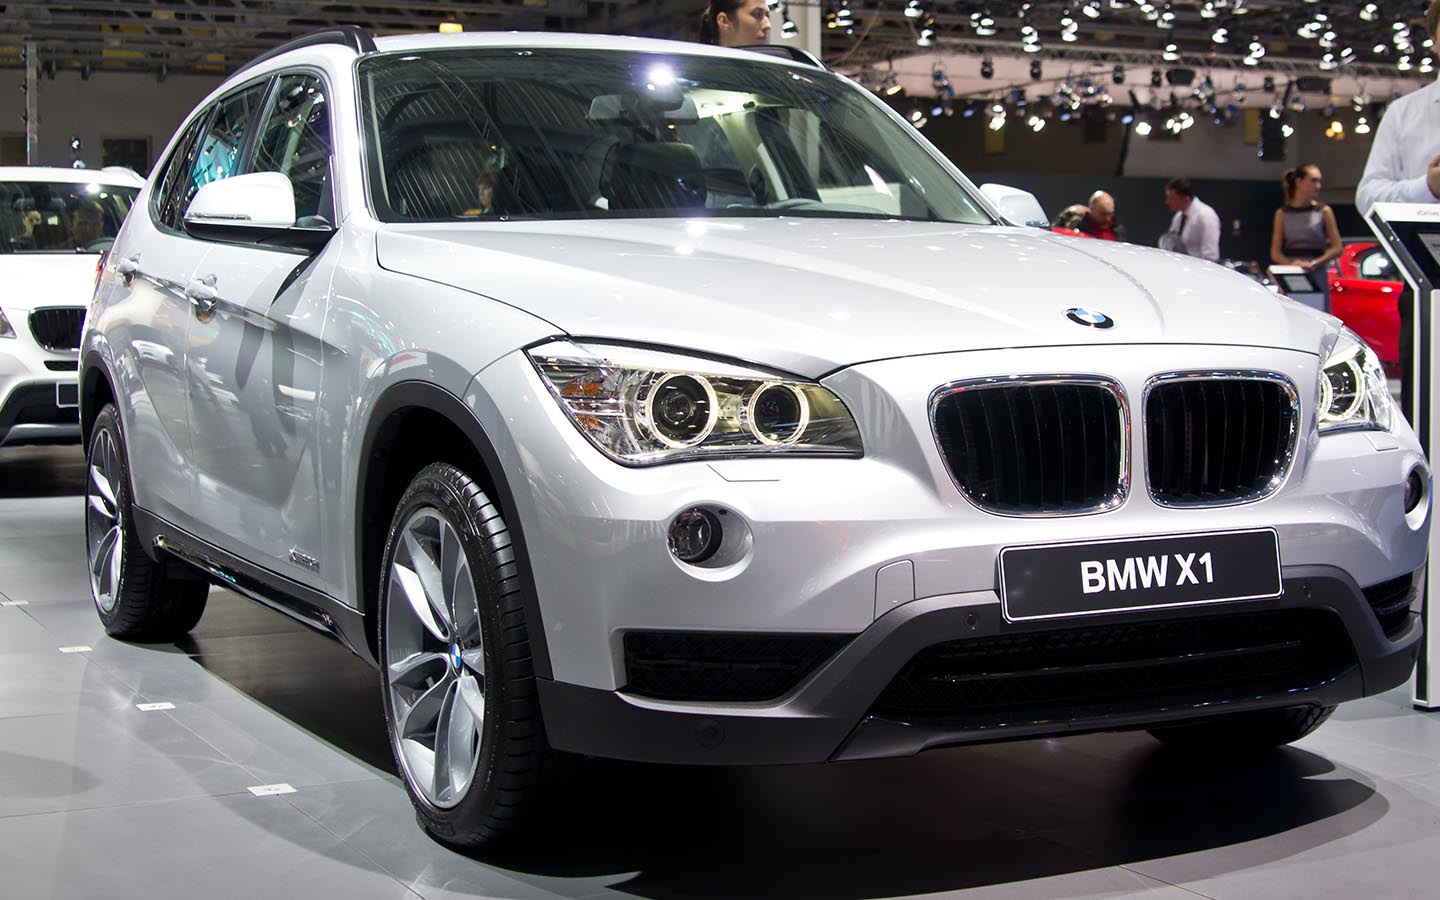 the bmw x1 is also among the Top German SUVs Under AED 250k